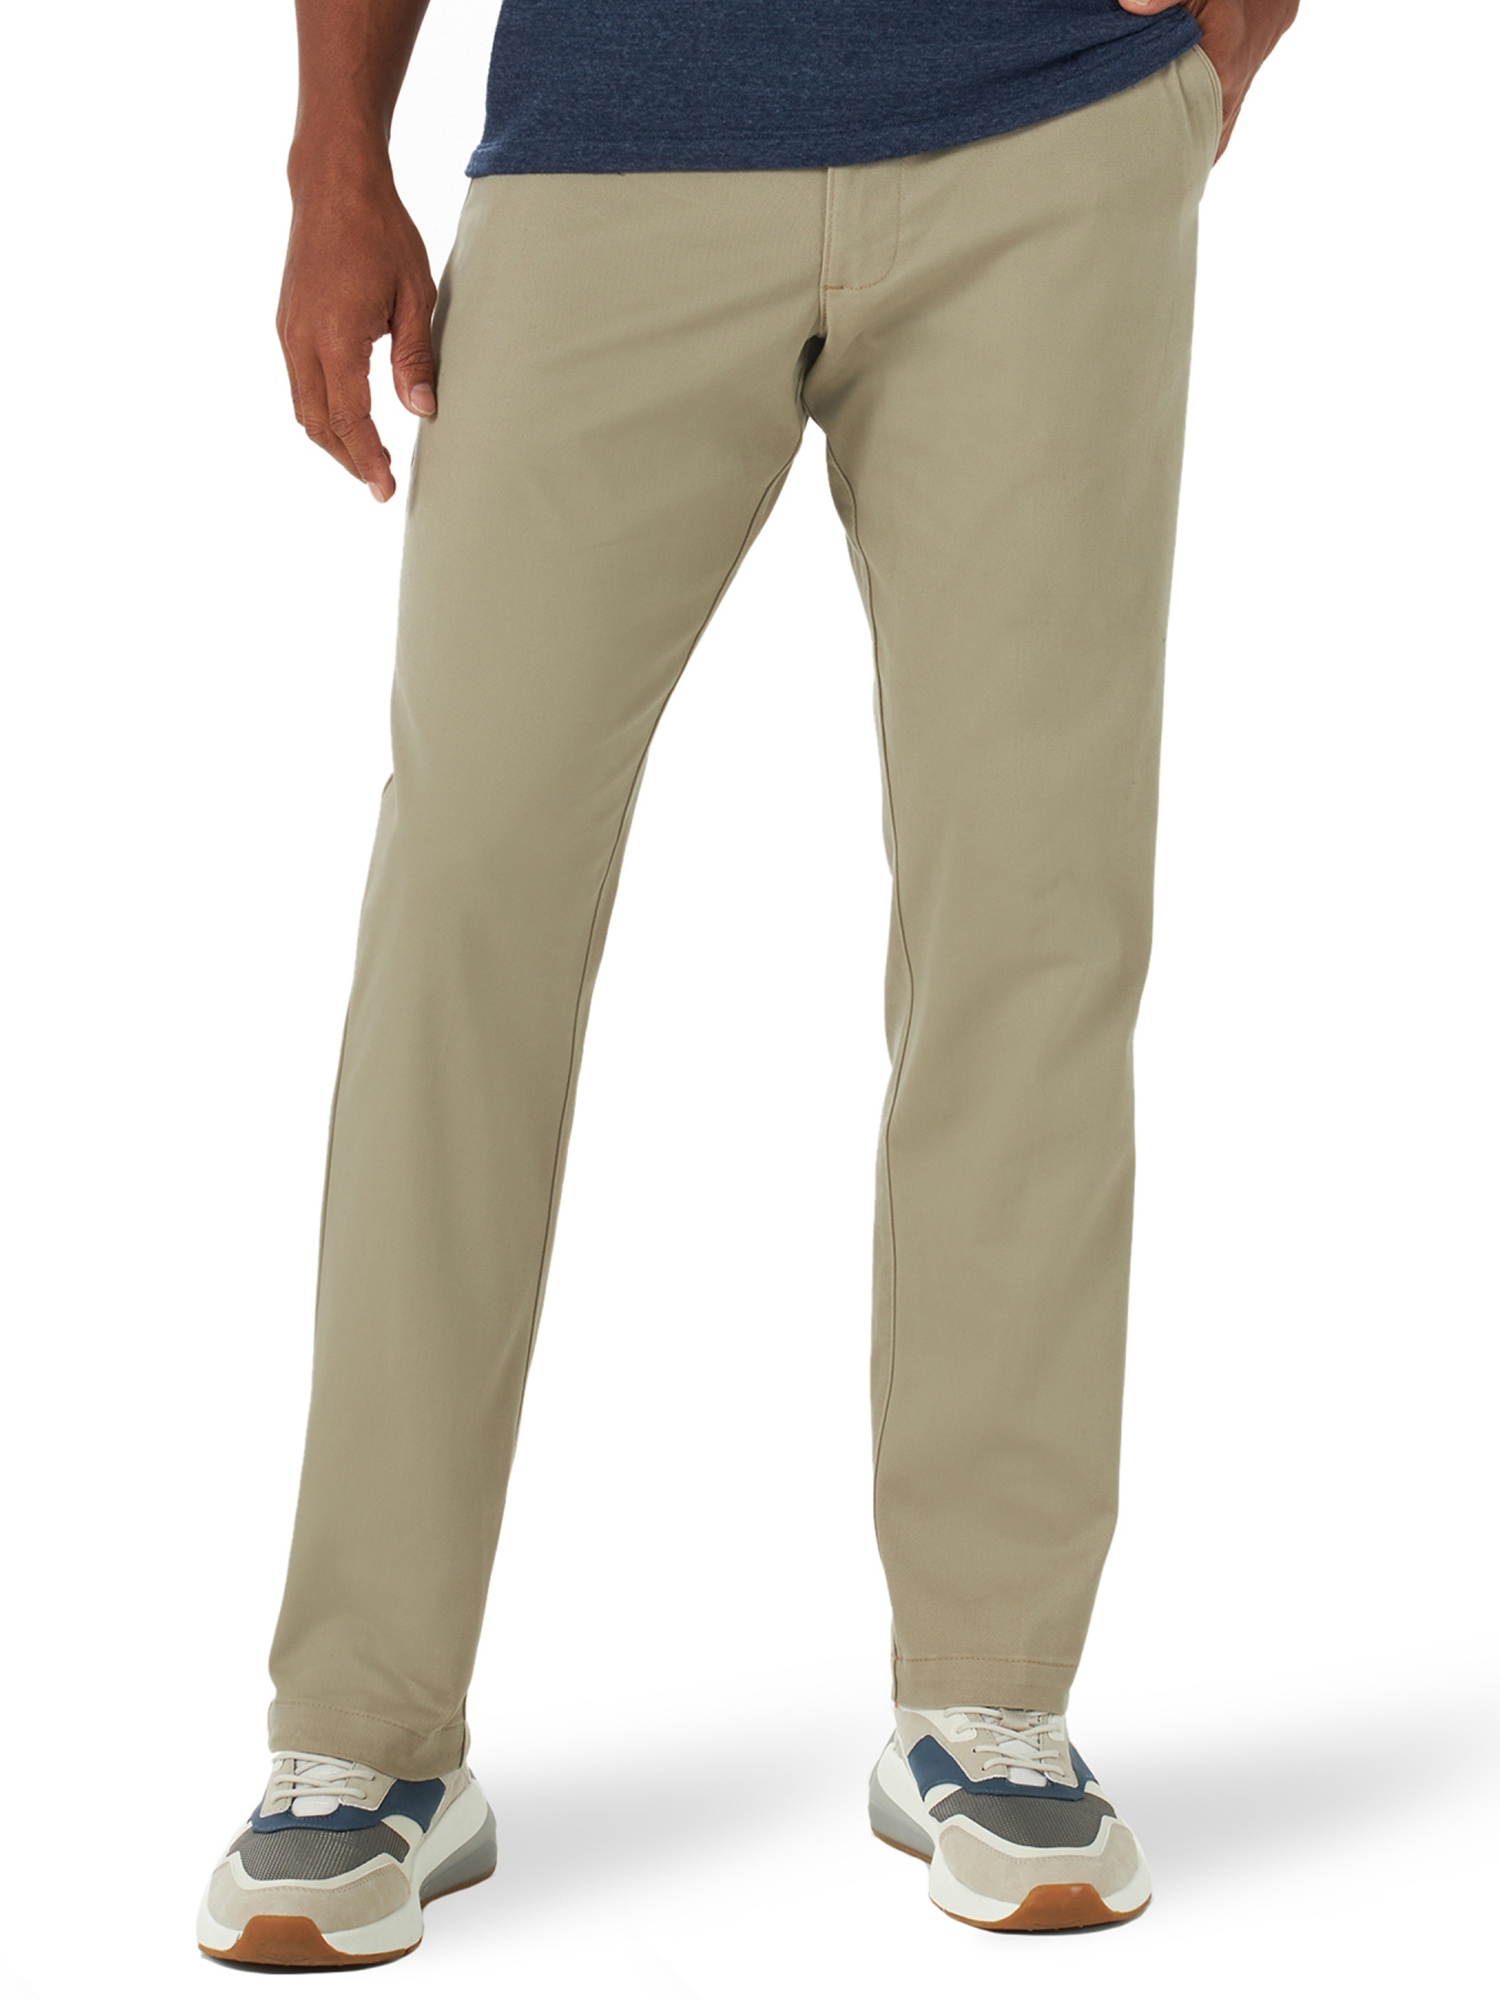 Lee Men's Extreme Comfort Relaxed Fit Pant - Walmart.com